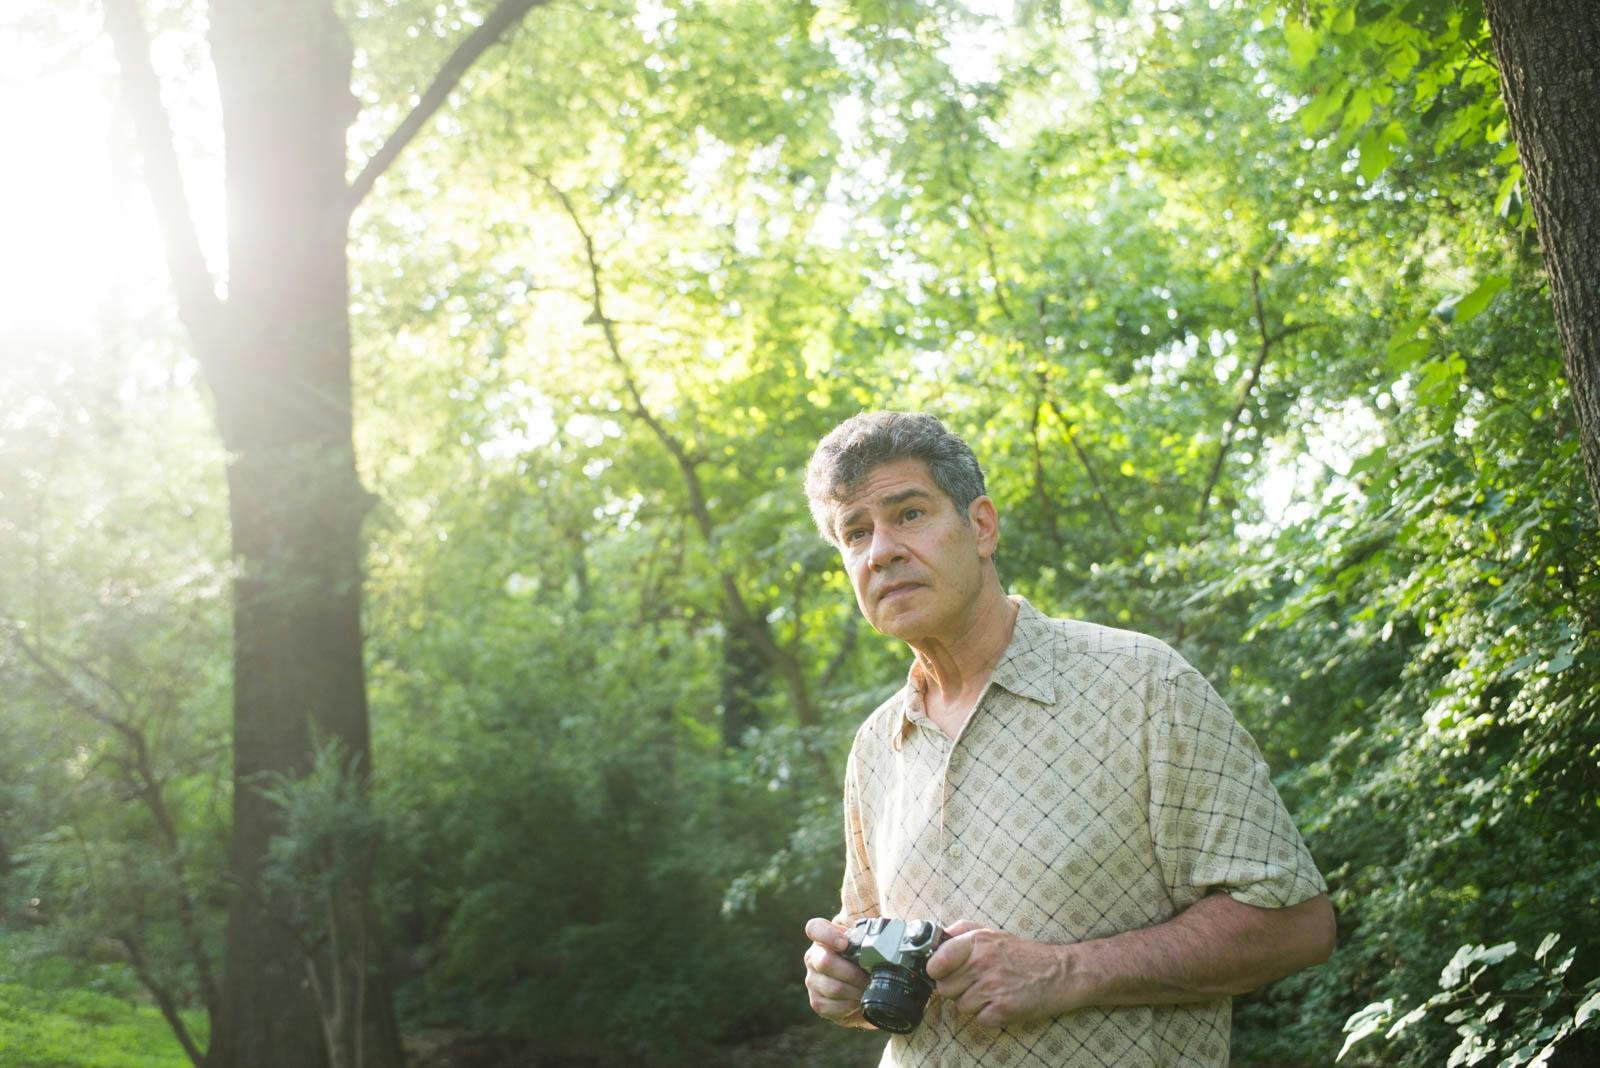 A man with grey hair in the woods holding an SLR camera.